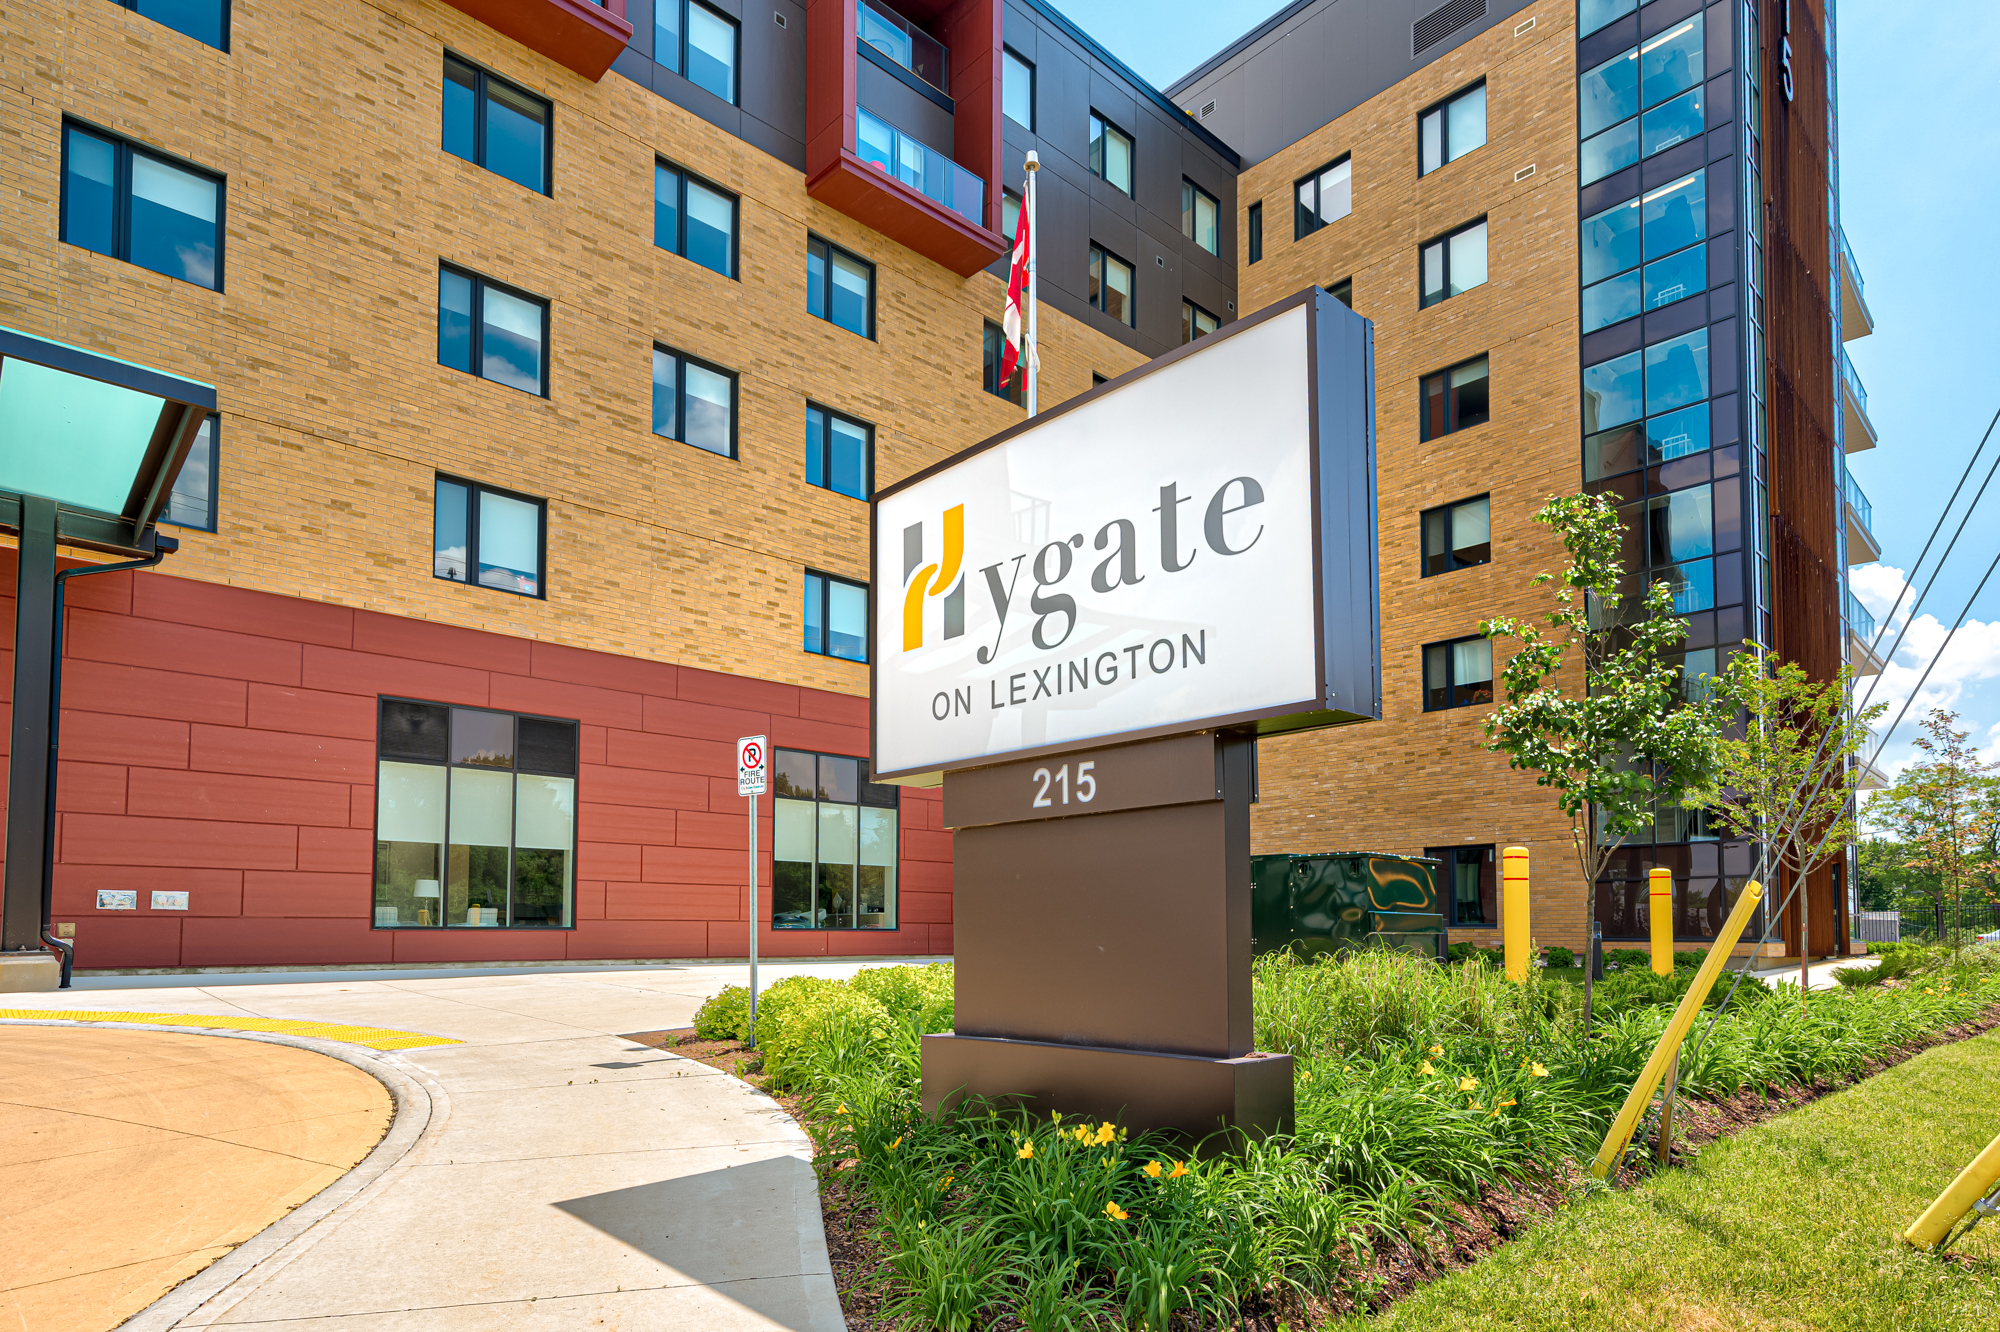 Hygate on Lexington retirement home exterior and sign